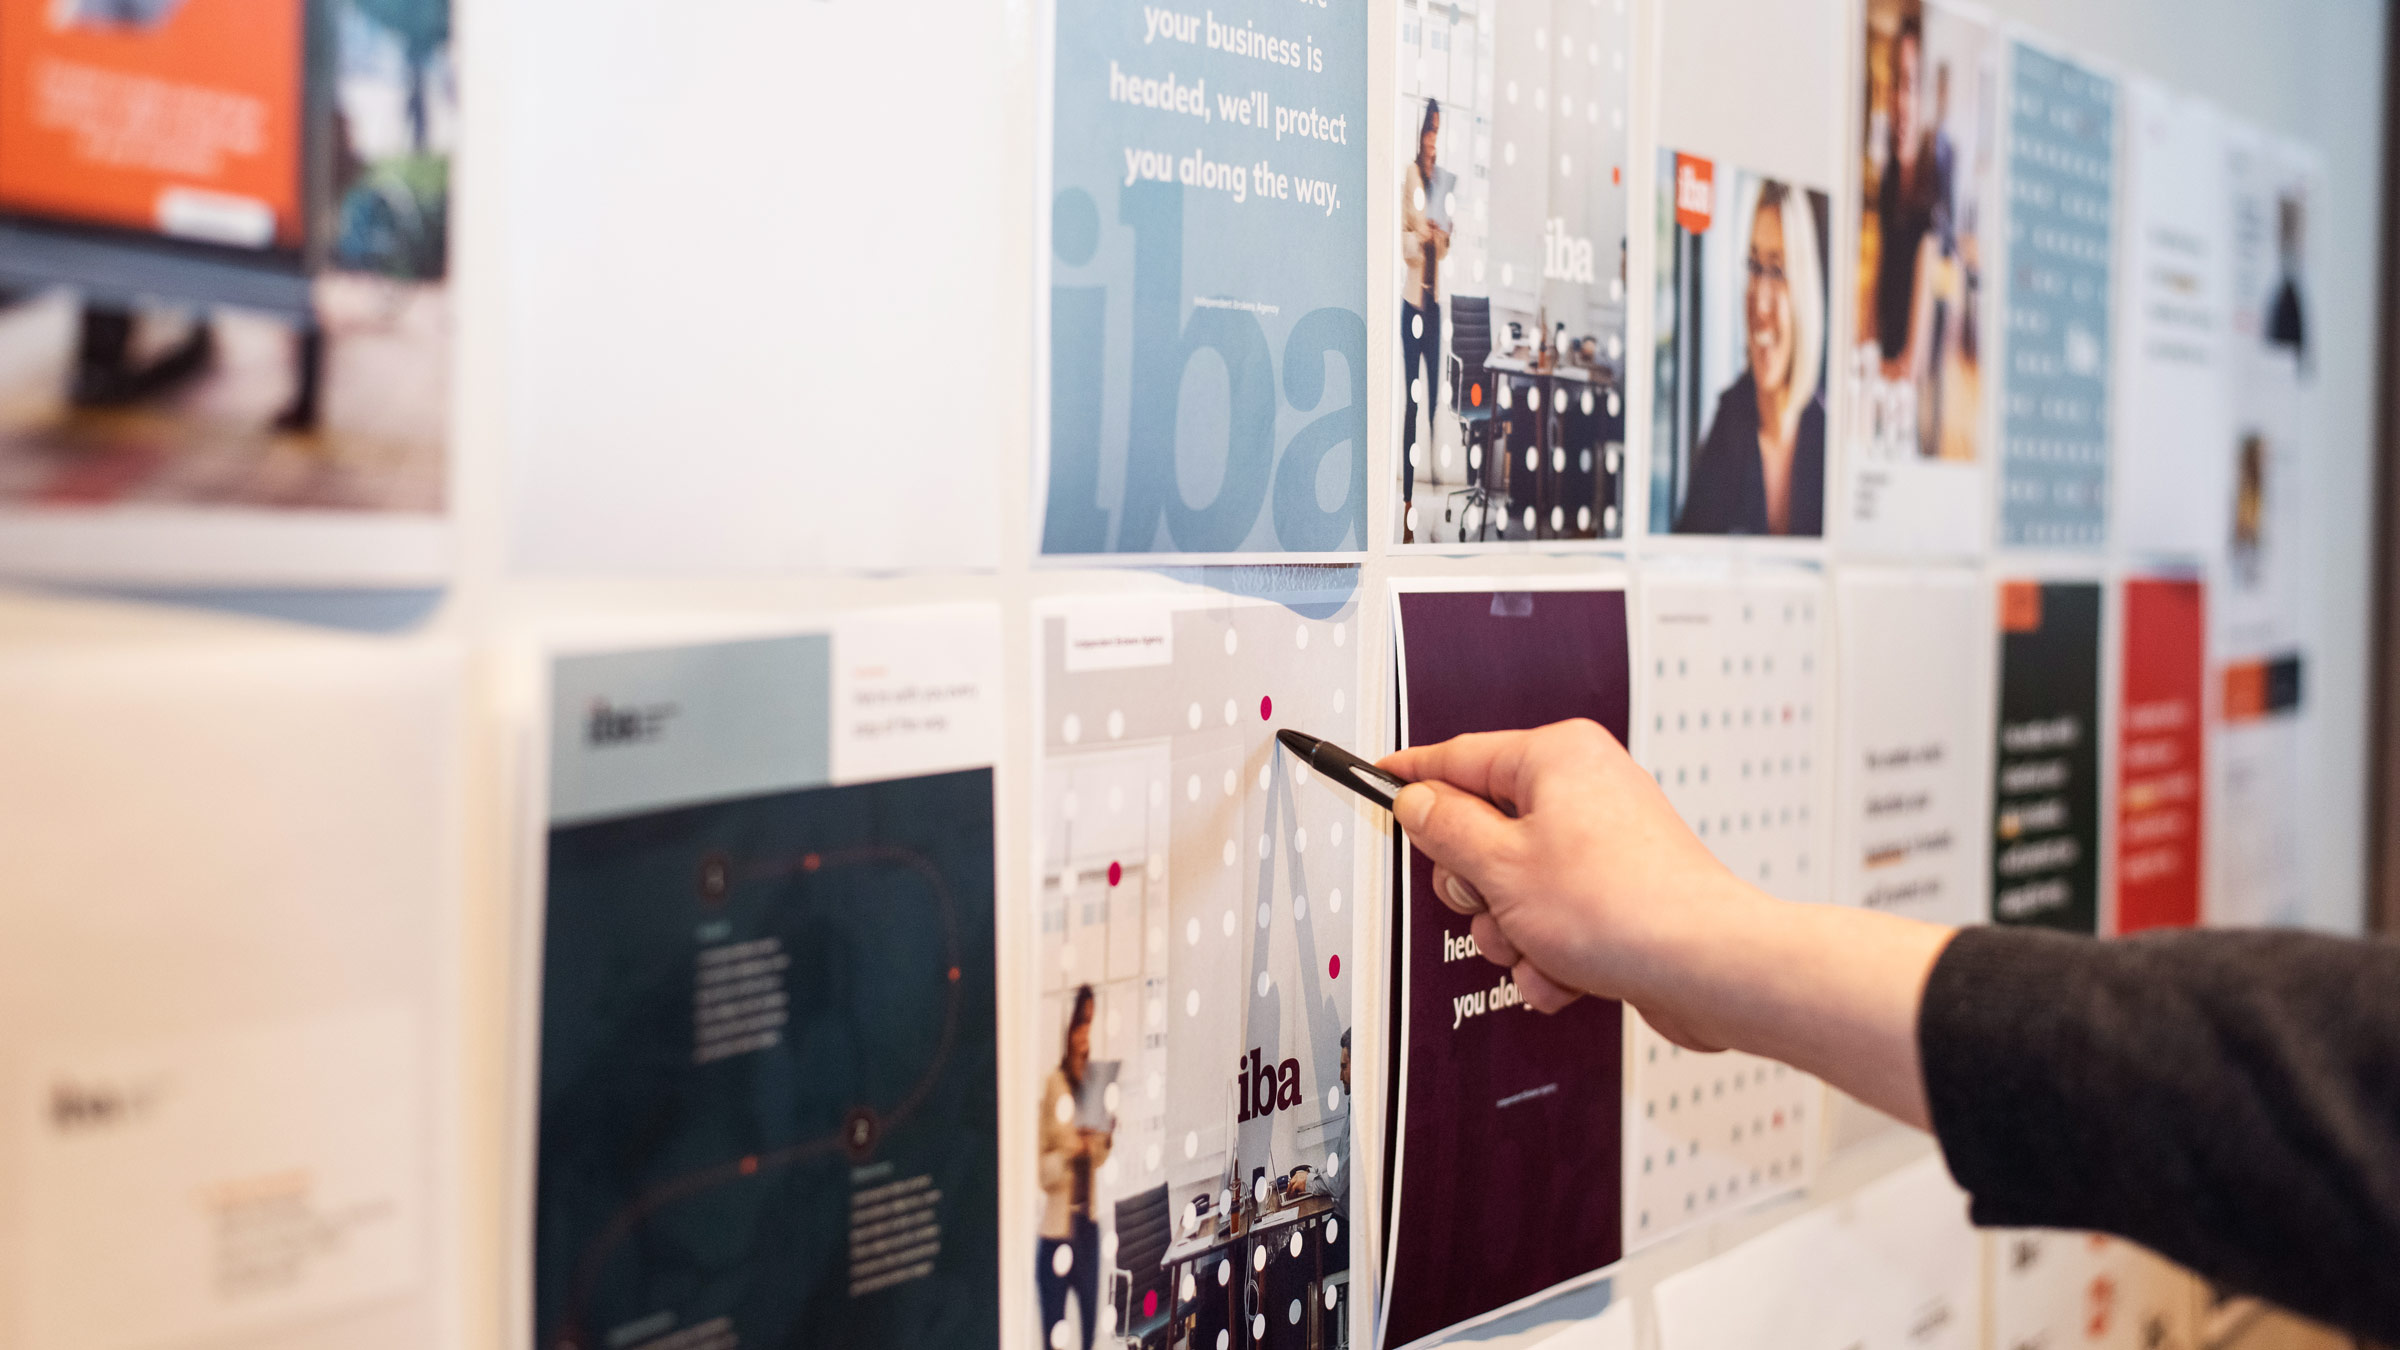 Designer at Atomicdust discuss branding elements for IBA insurance brokers on a whiteboard.